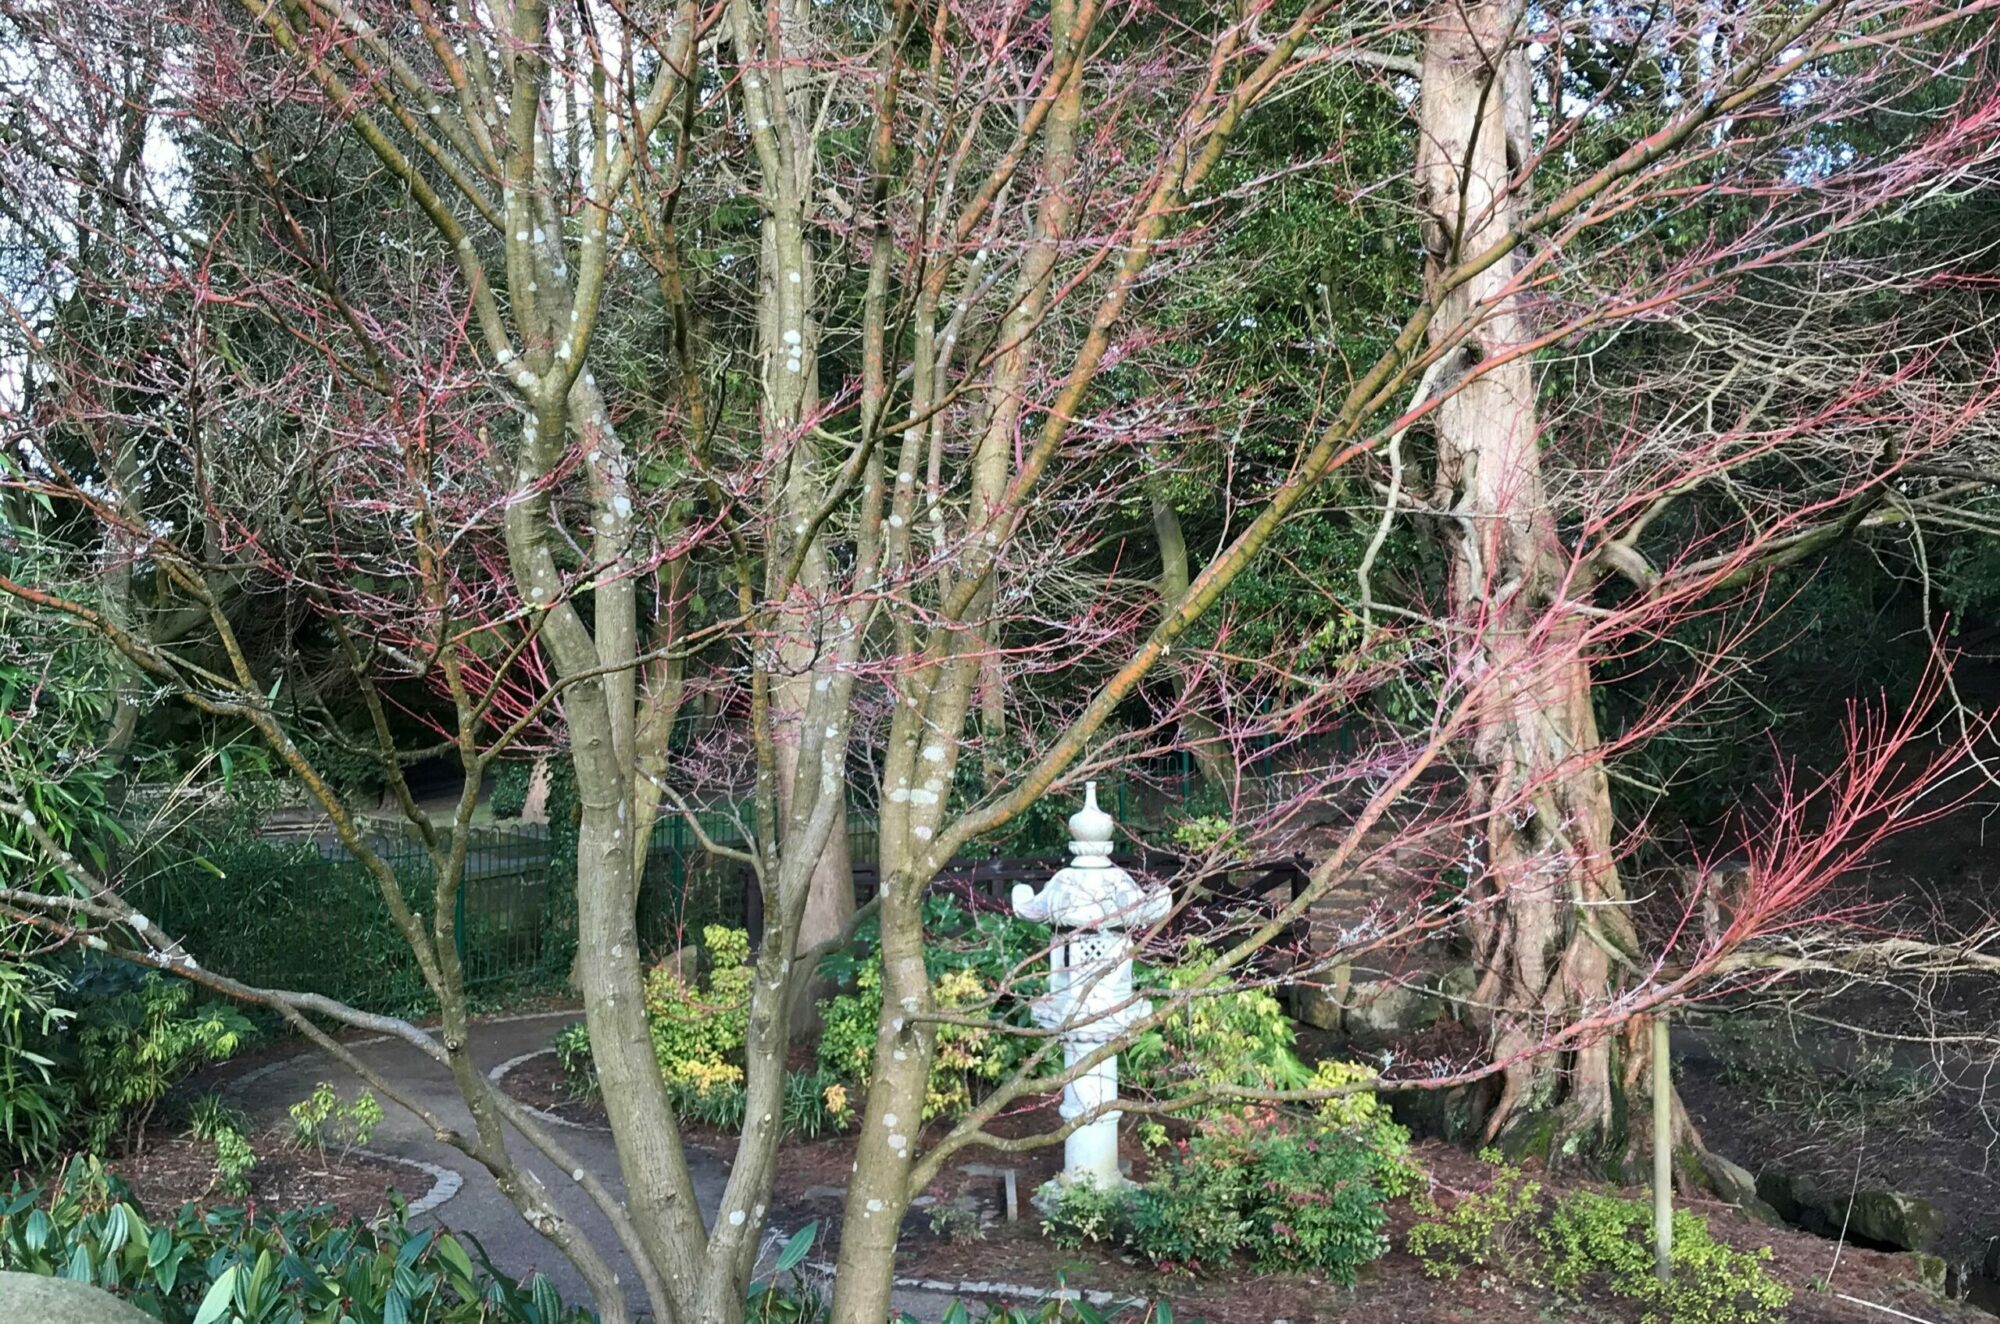 Japanese ornament, path and trees with red branches in a Japanese style park